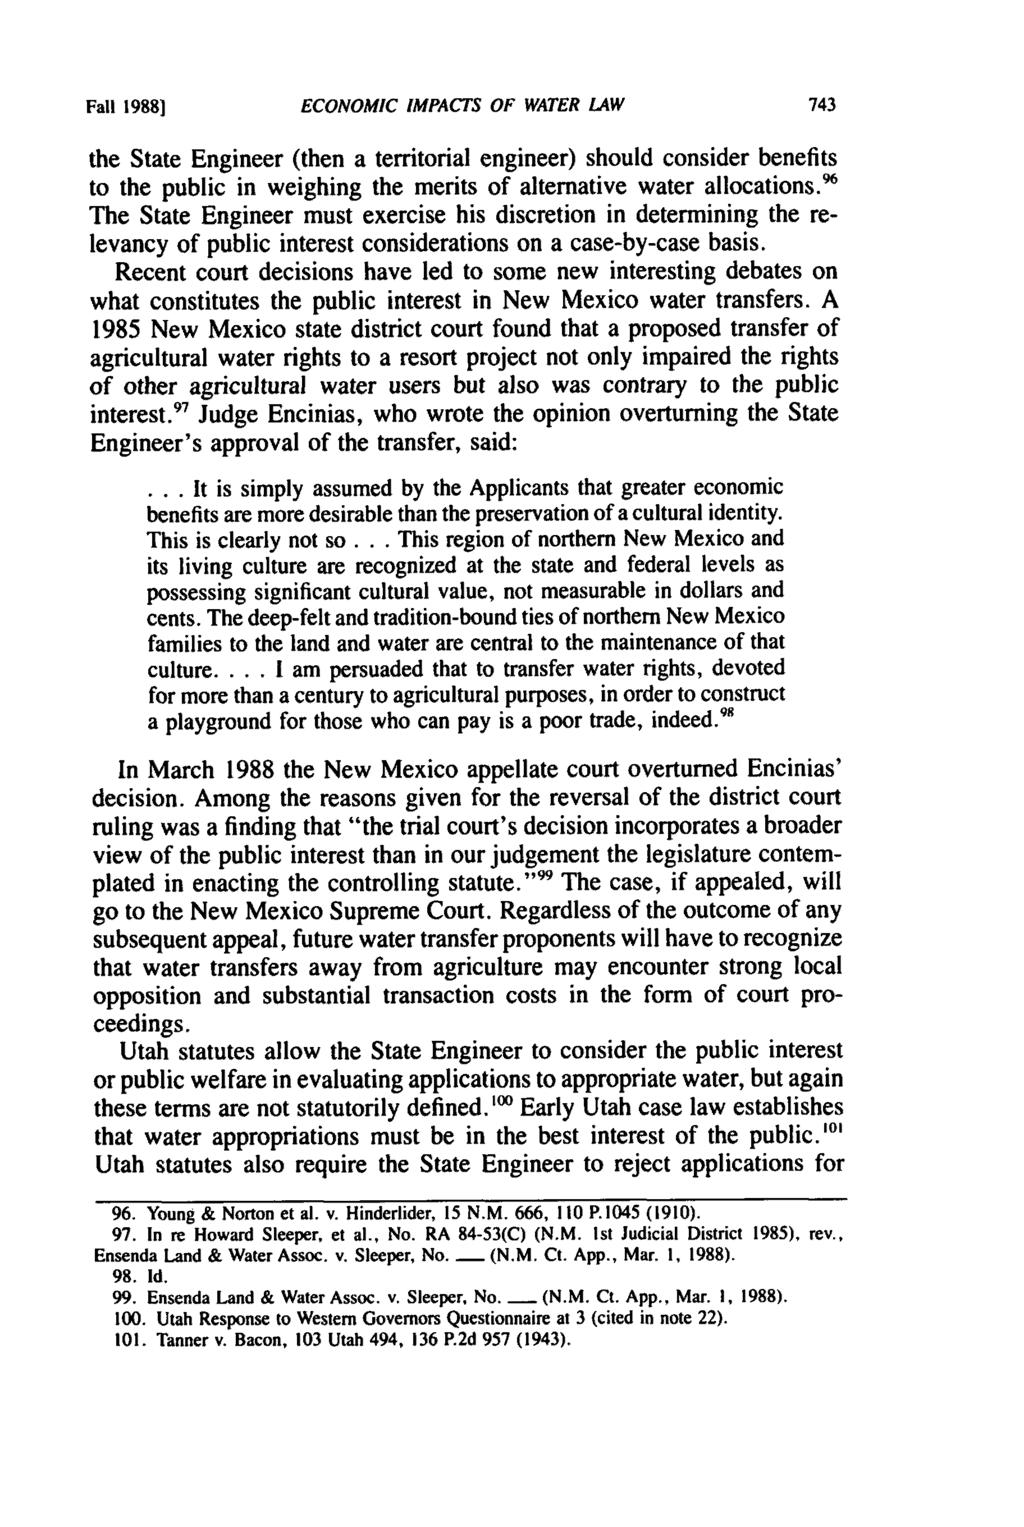 Fall 1988l ECONOMIC IMPACTS OF WATER LAW the State Engineer (then a territorial engineer) should consider benefits to the public in weighing the merits of alternative water allocations.